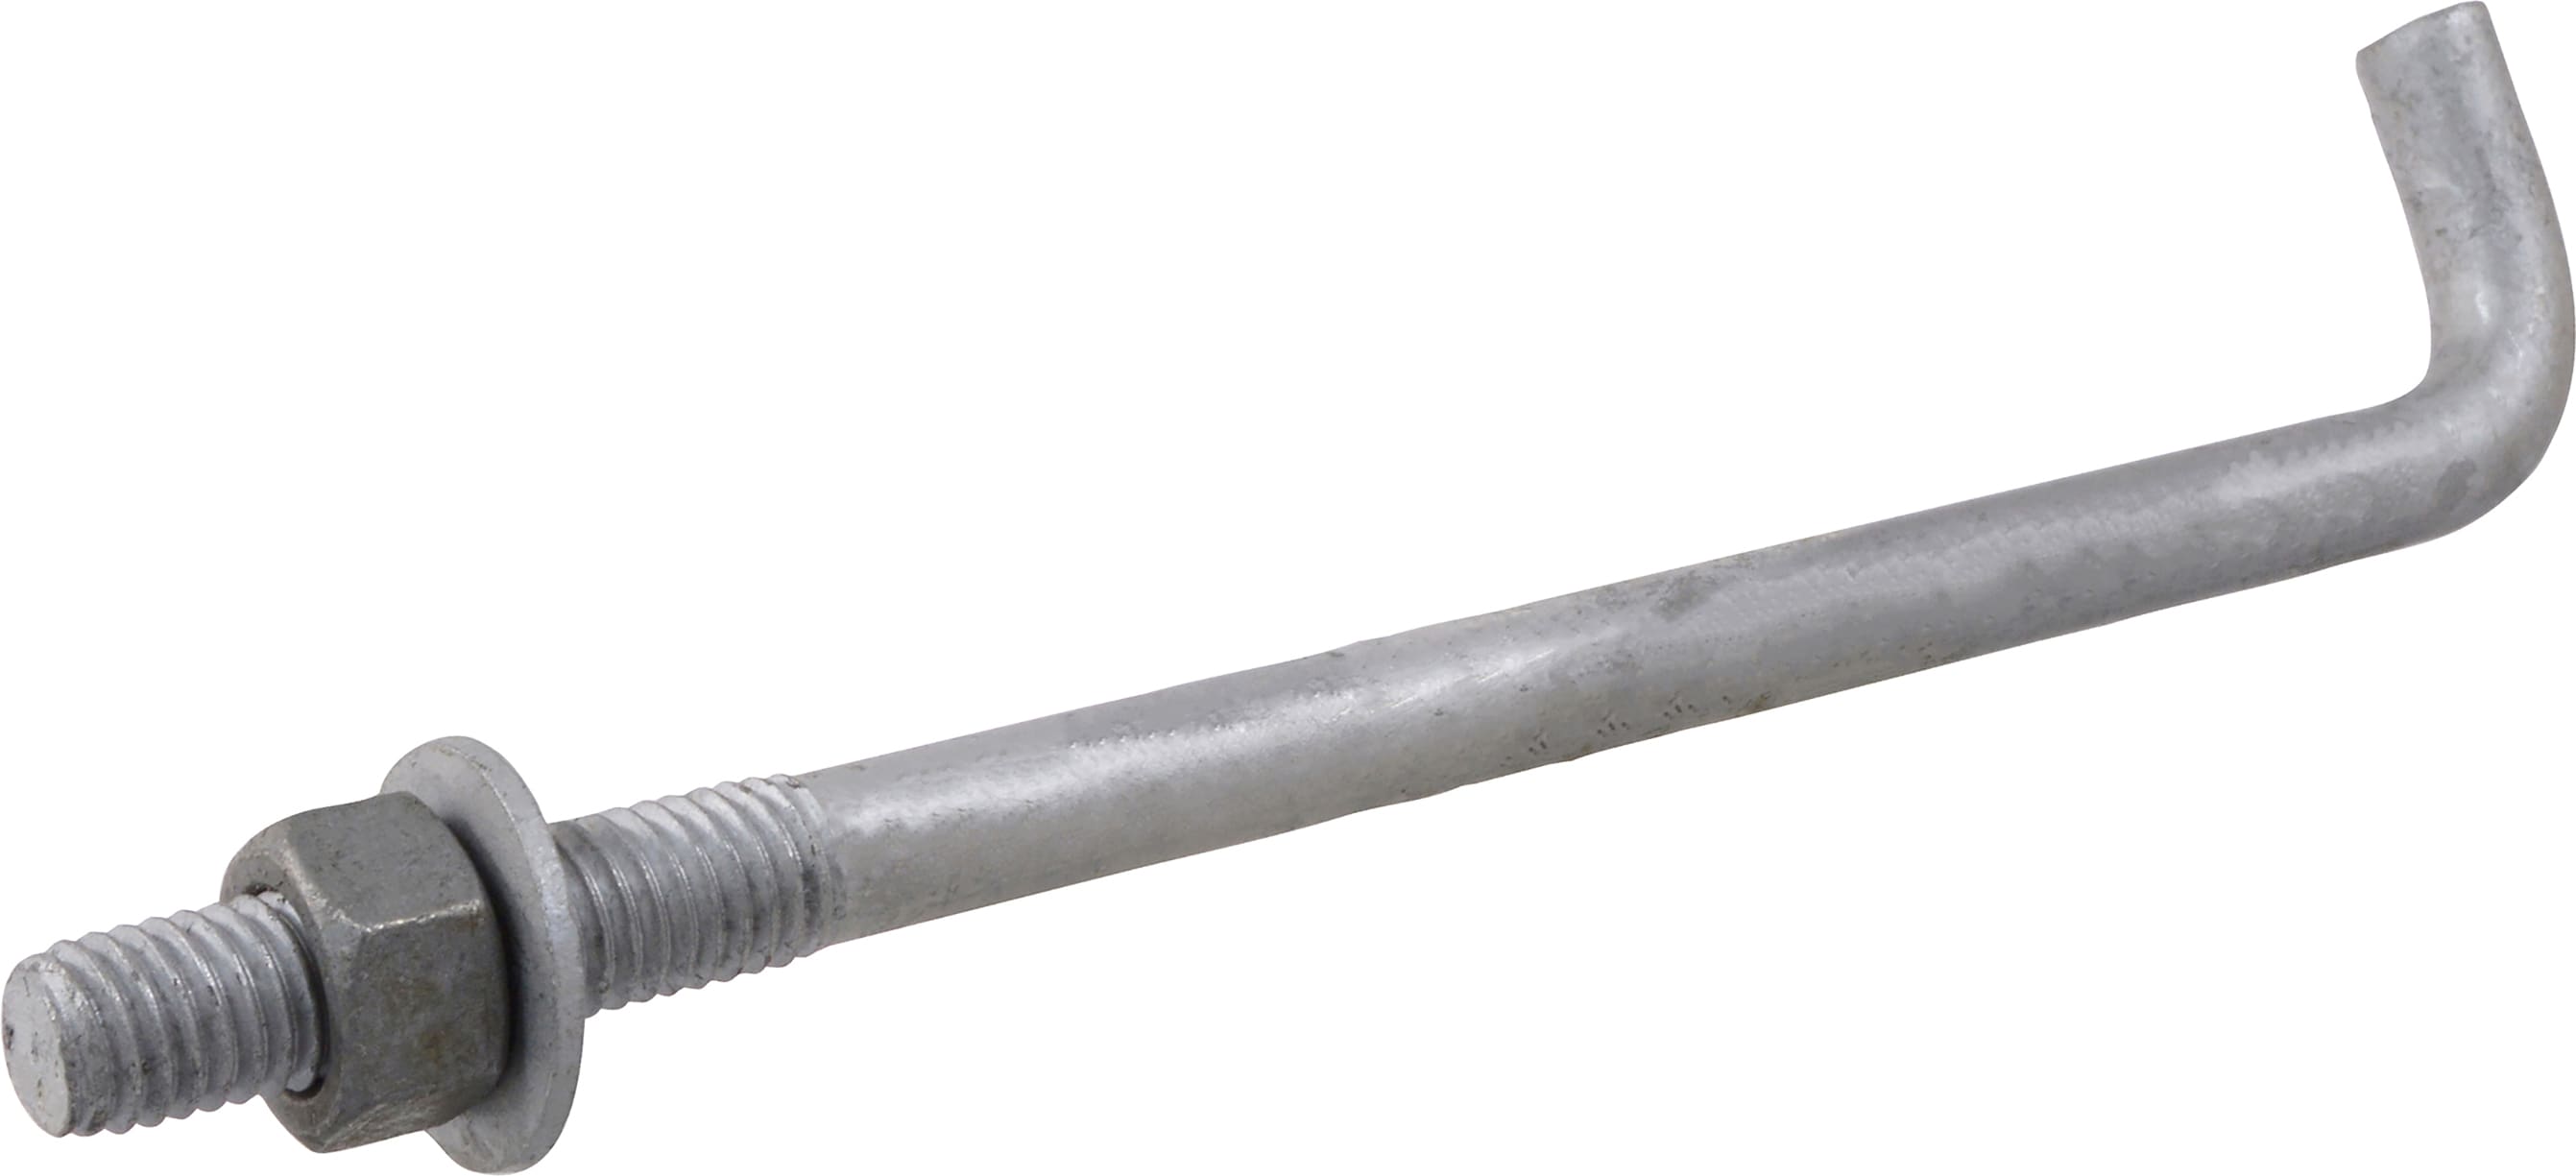 5 Washer Galvanized Anchor Bolt 8 x 1/2 with Nut 